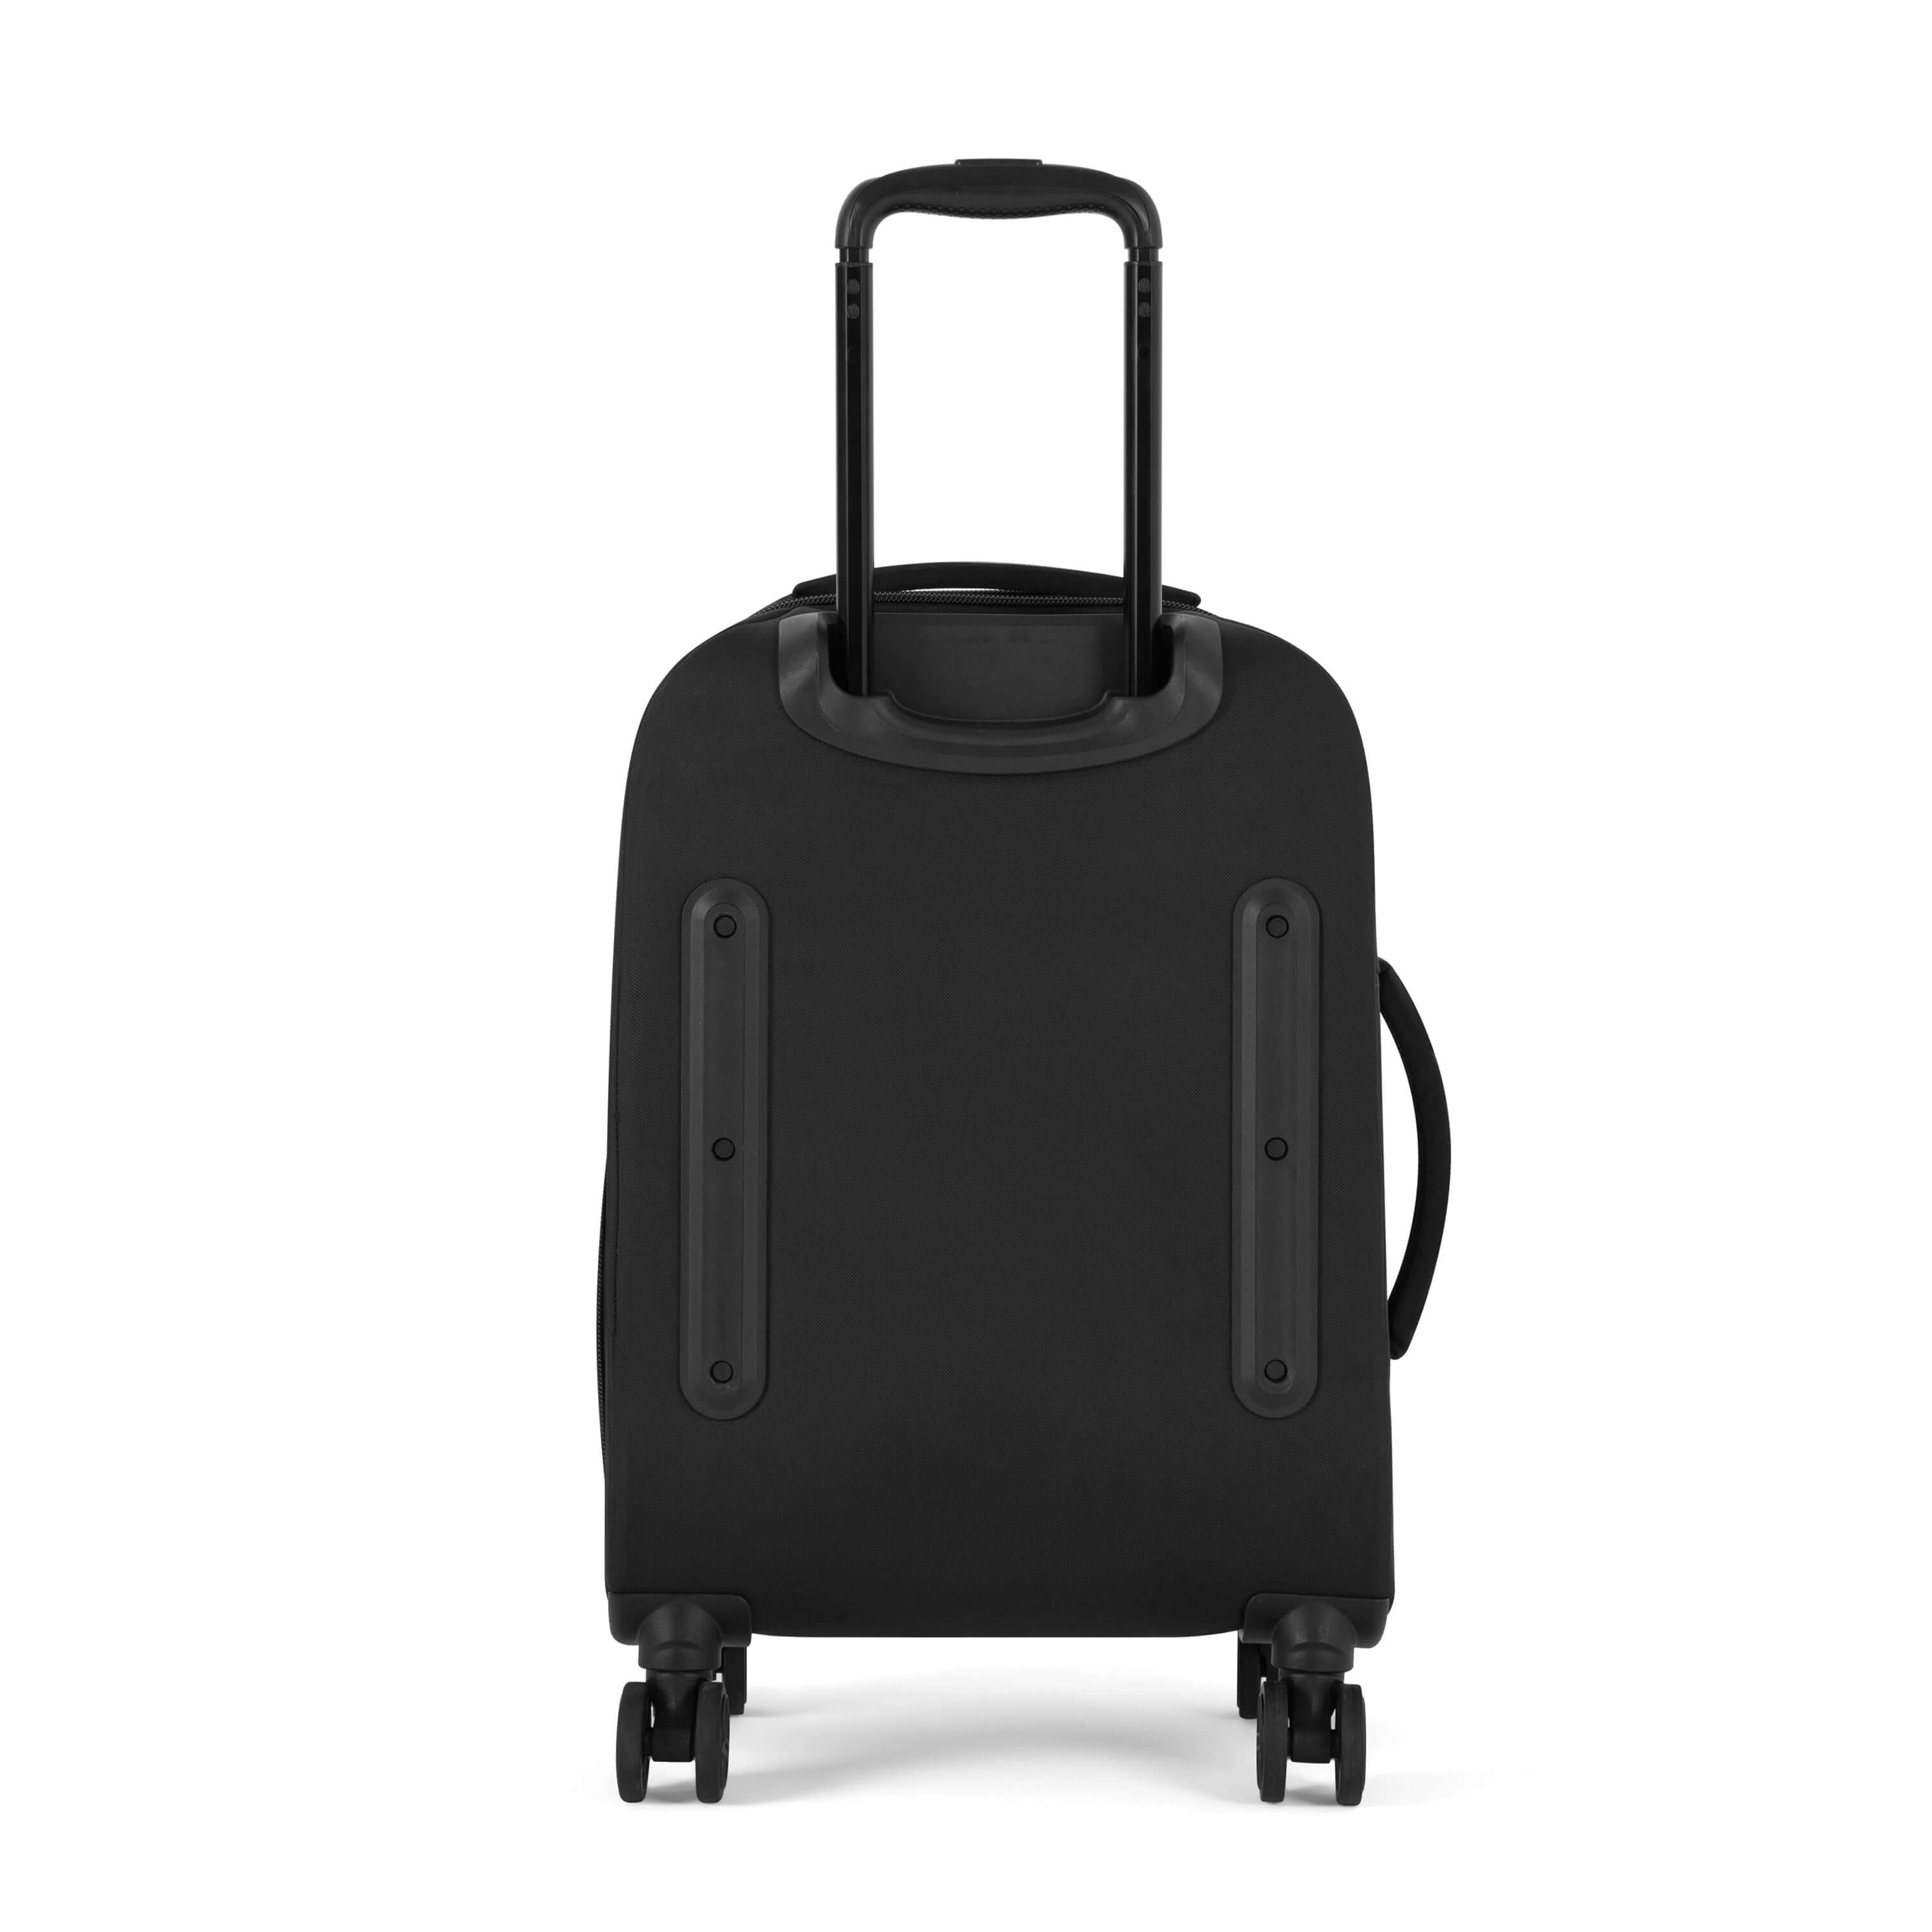 Flat view of the back of Sherpani’s Anti-Theft luggage, the Latitude. The back of the suitcase is black and has vegan leather accents in black. On the top of the suitcase sits a retractable luggage handle. On the side sits an easy-access handle. At the bottom are four 360-degree spinner wheels for smooth rolling. 